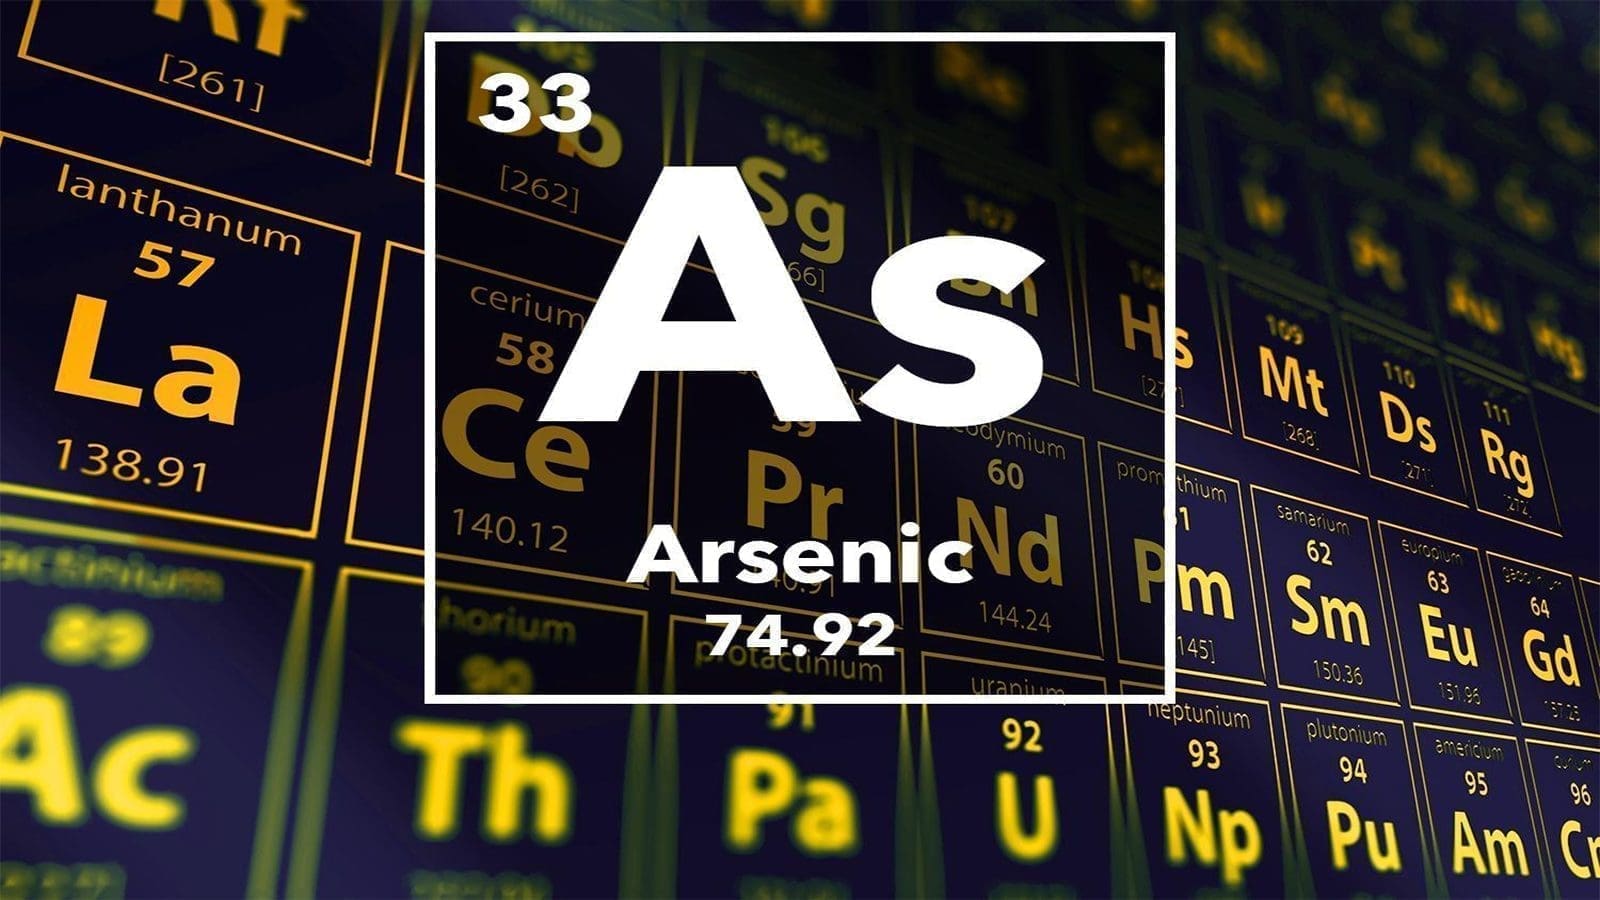 EU sets new allowable limits for arsenic in some food products to reduce exposure risk